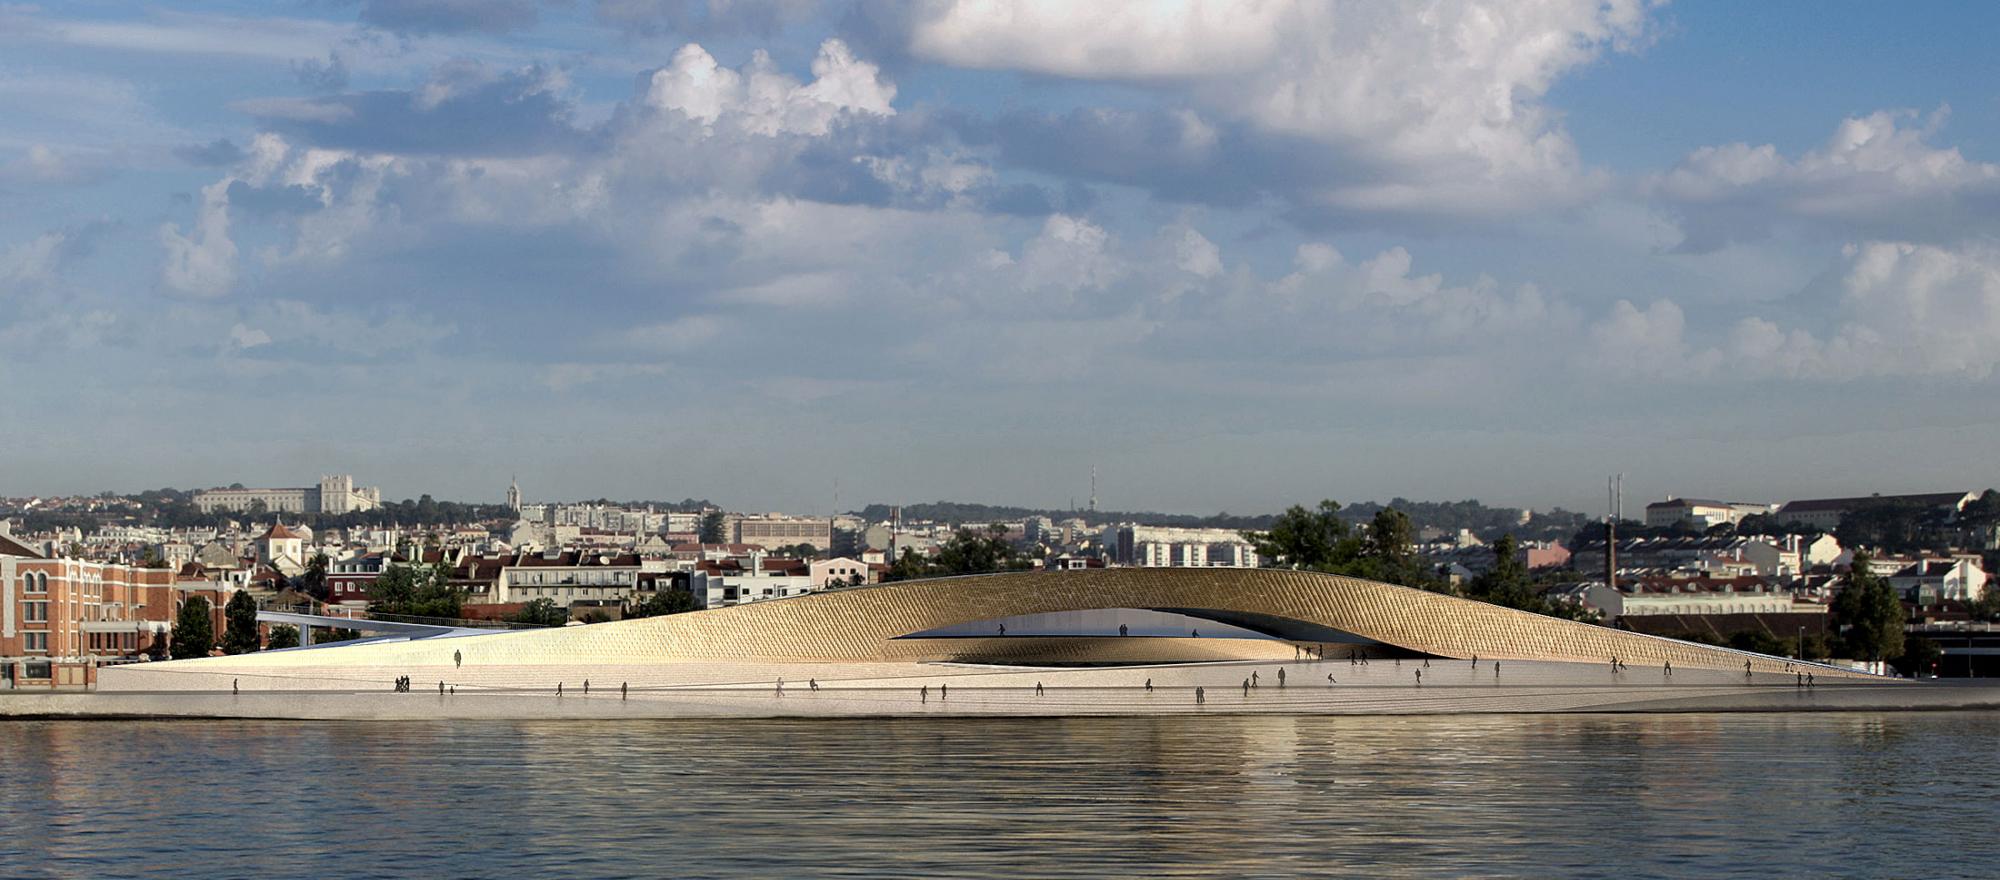 Lisbon's Museum of Art, Architecture, and Technology (MAAT).